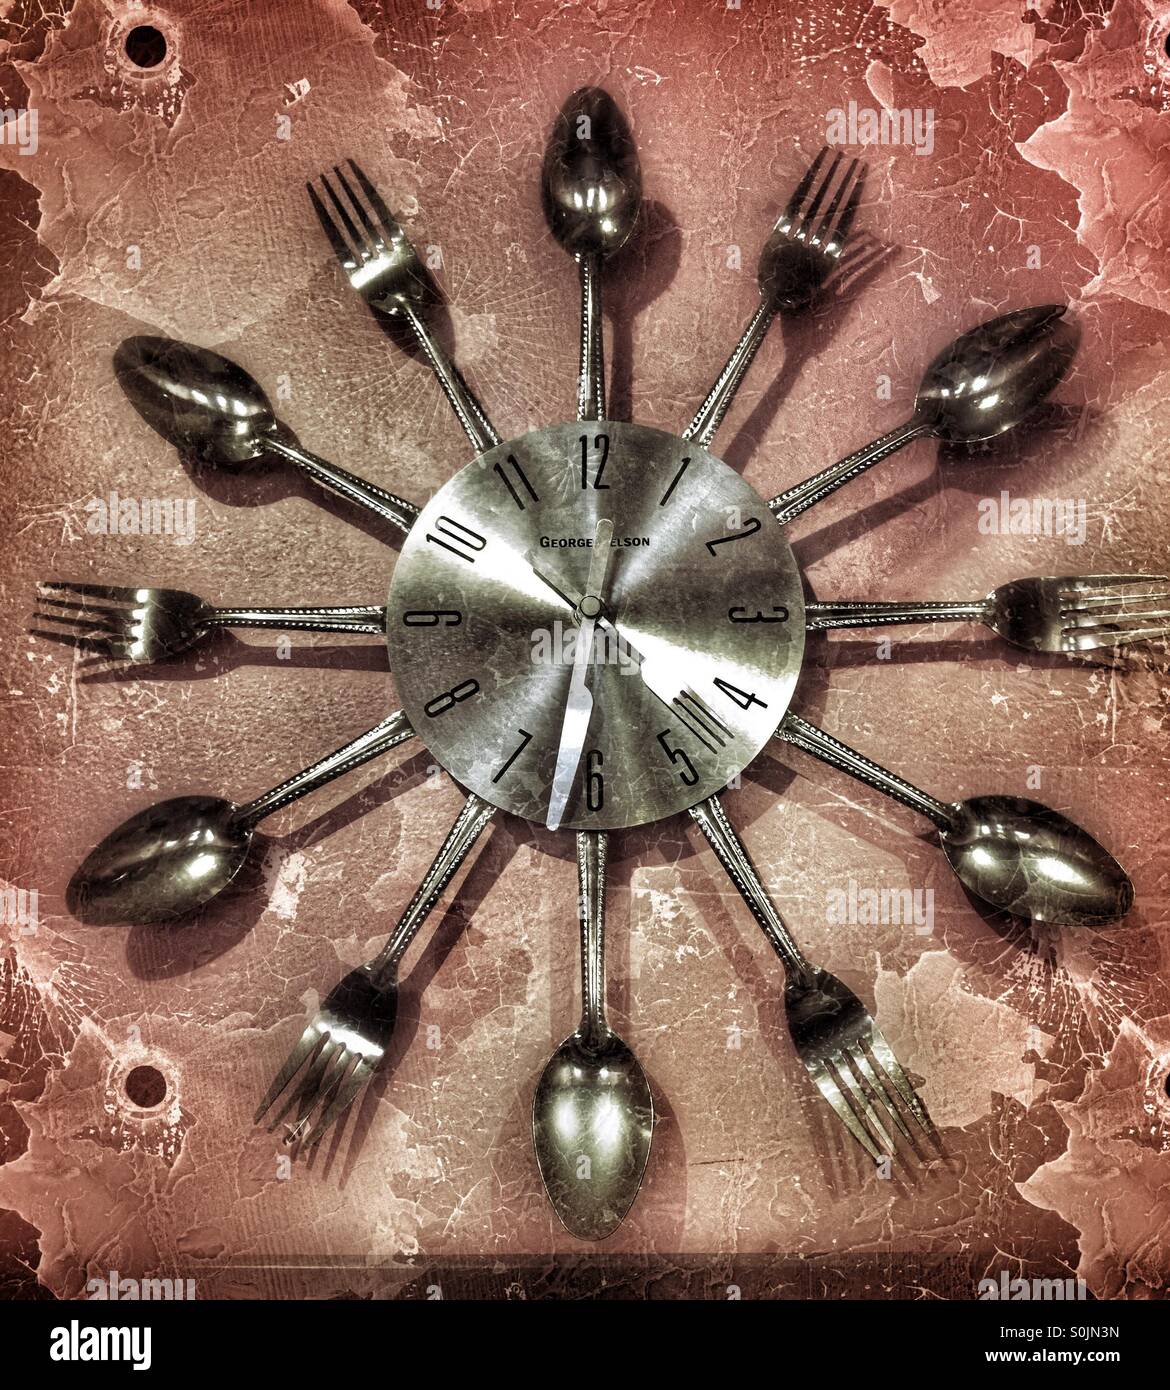 Clock made of forks and spoons Stock Photo